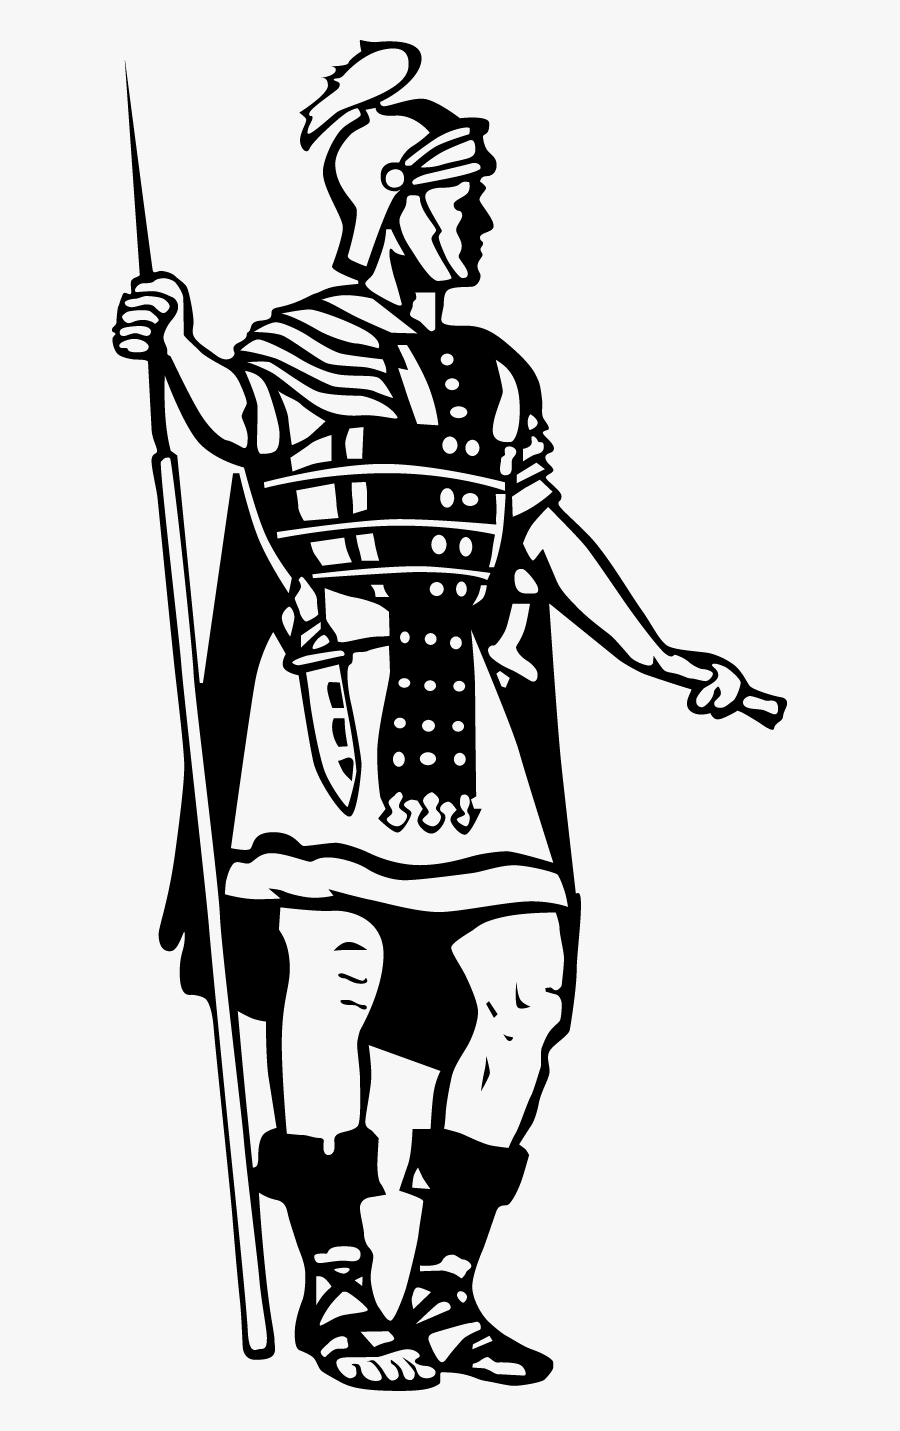 Top Christian Warrior Clip Art Image - Warrior Clipart Black And White, Transparent Clipart